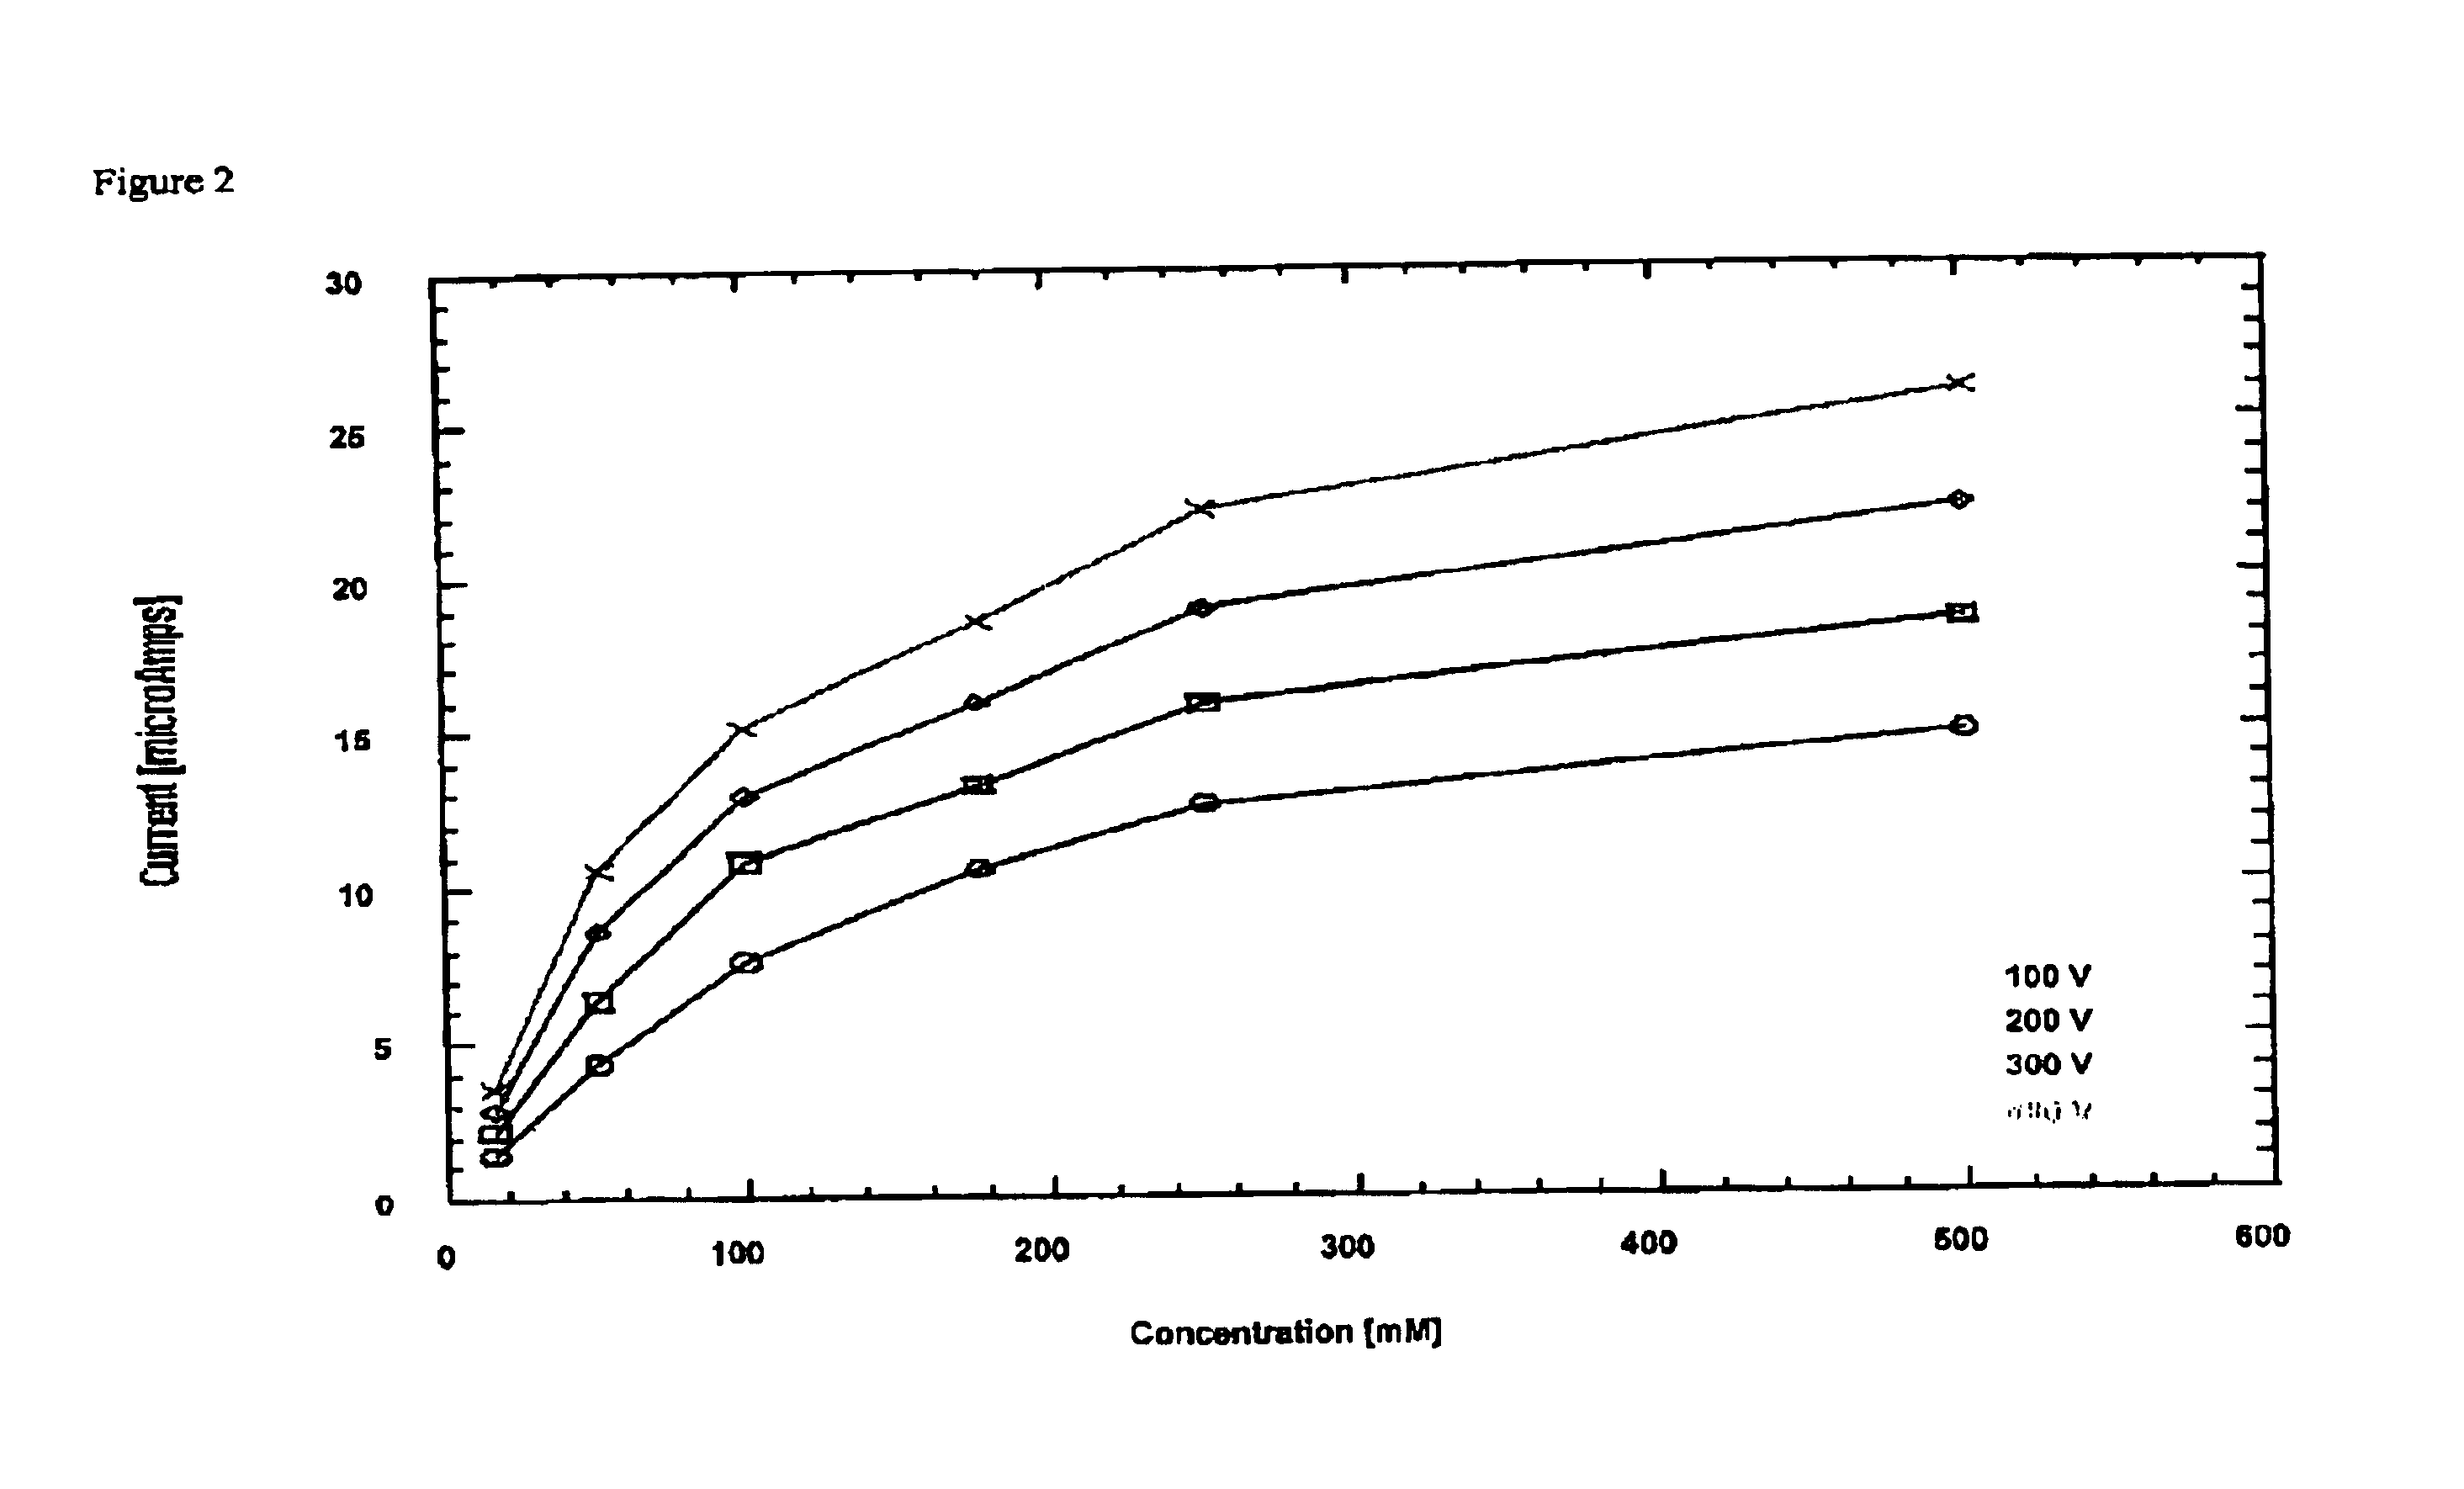 Method for measuring fluid chemistry in drilling and production operations